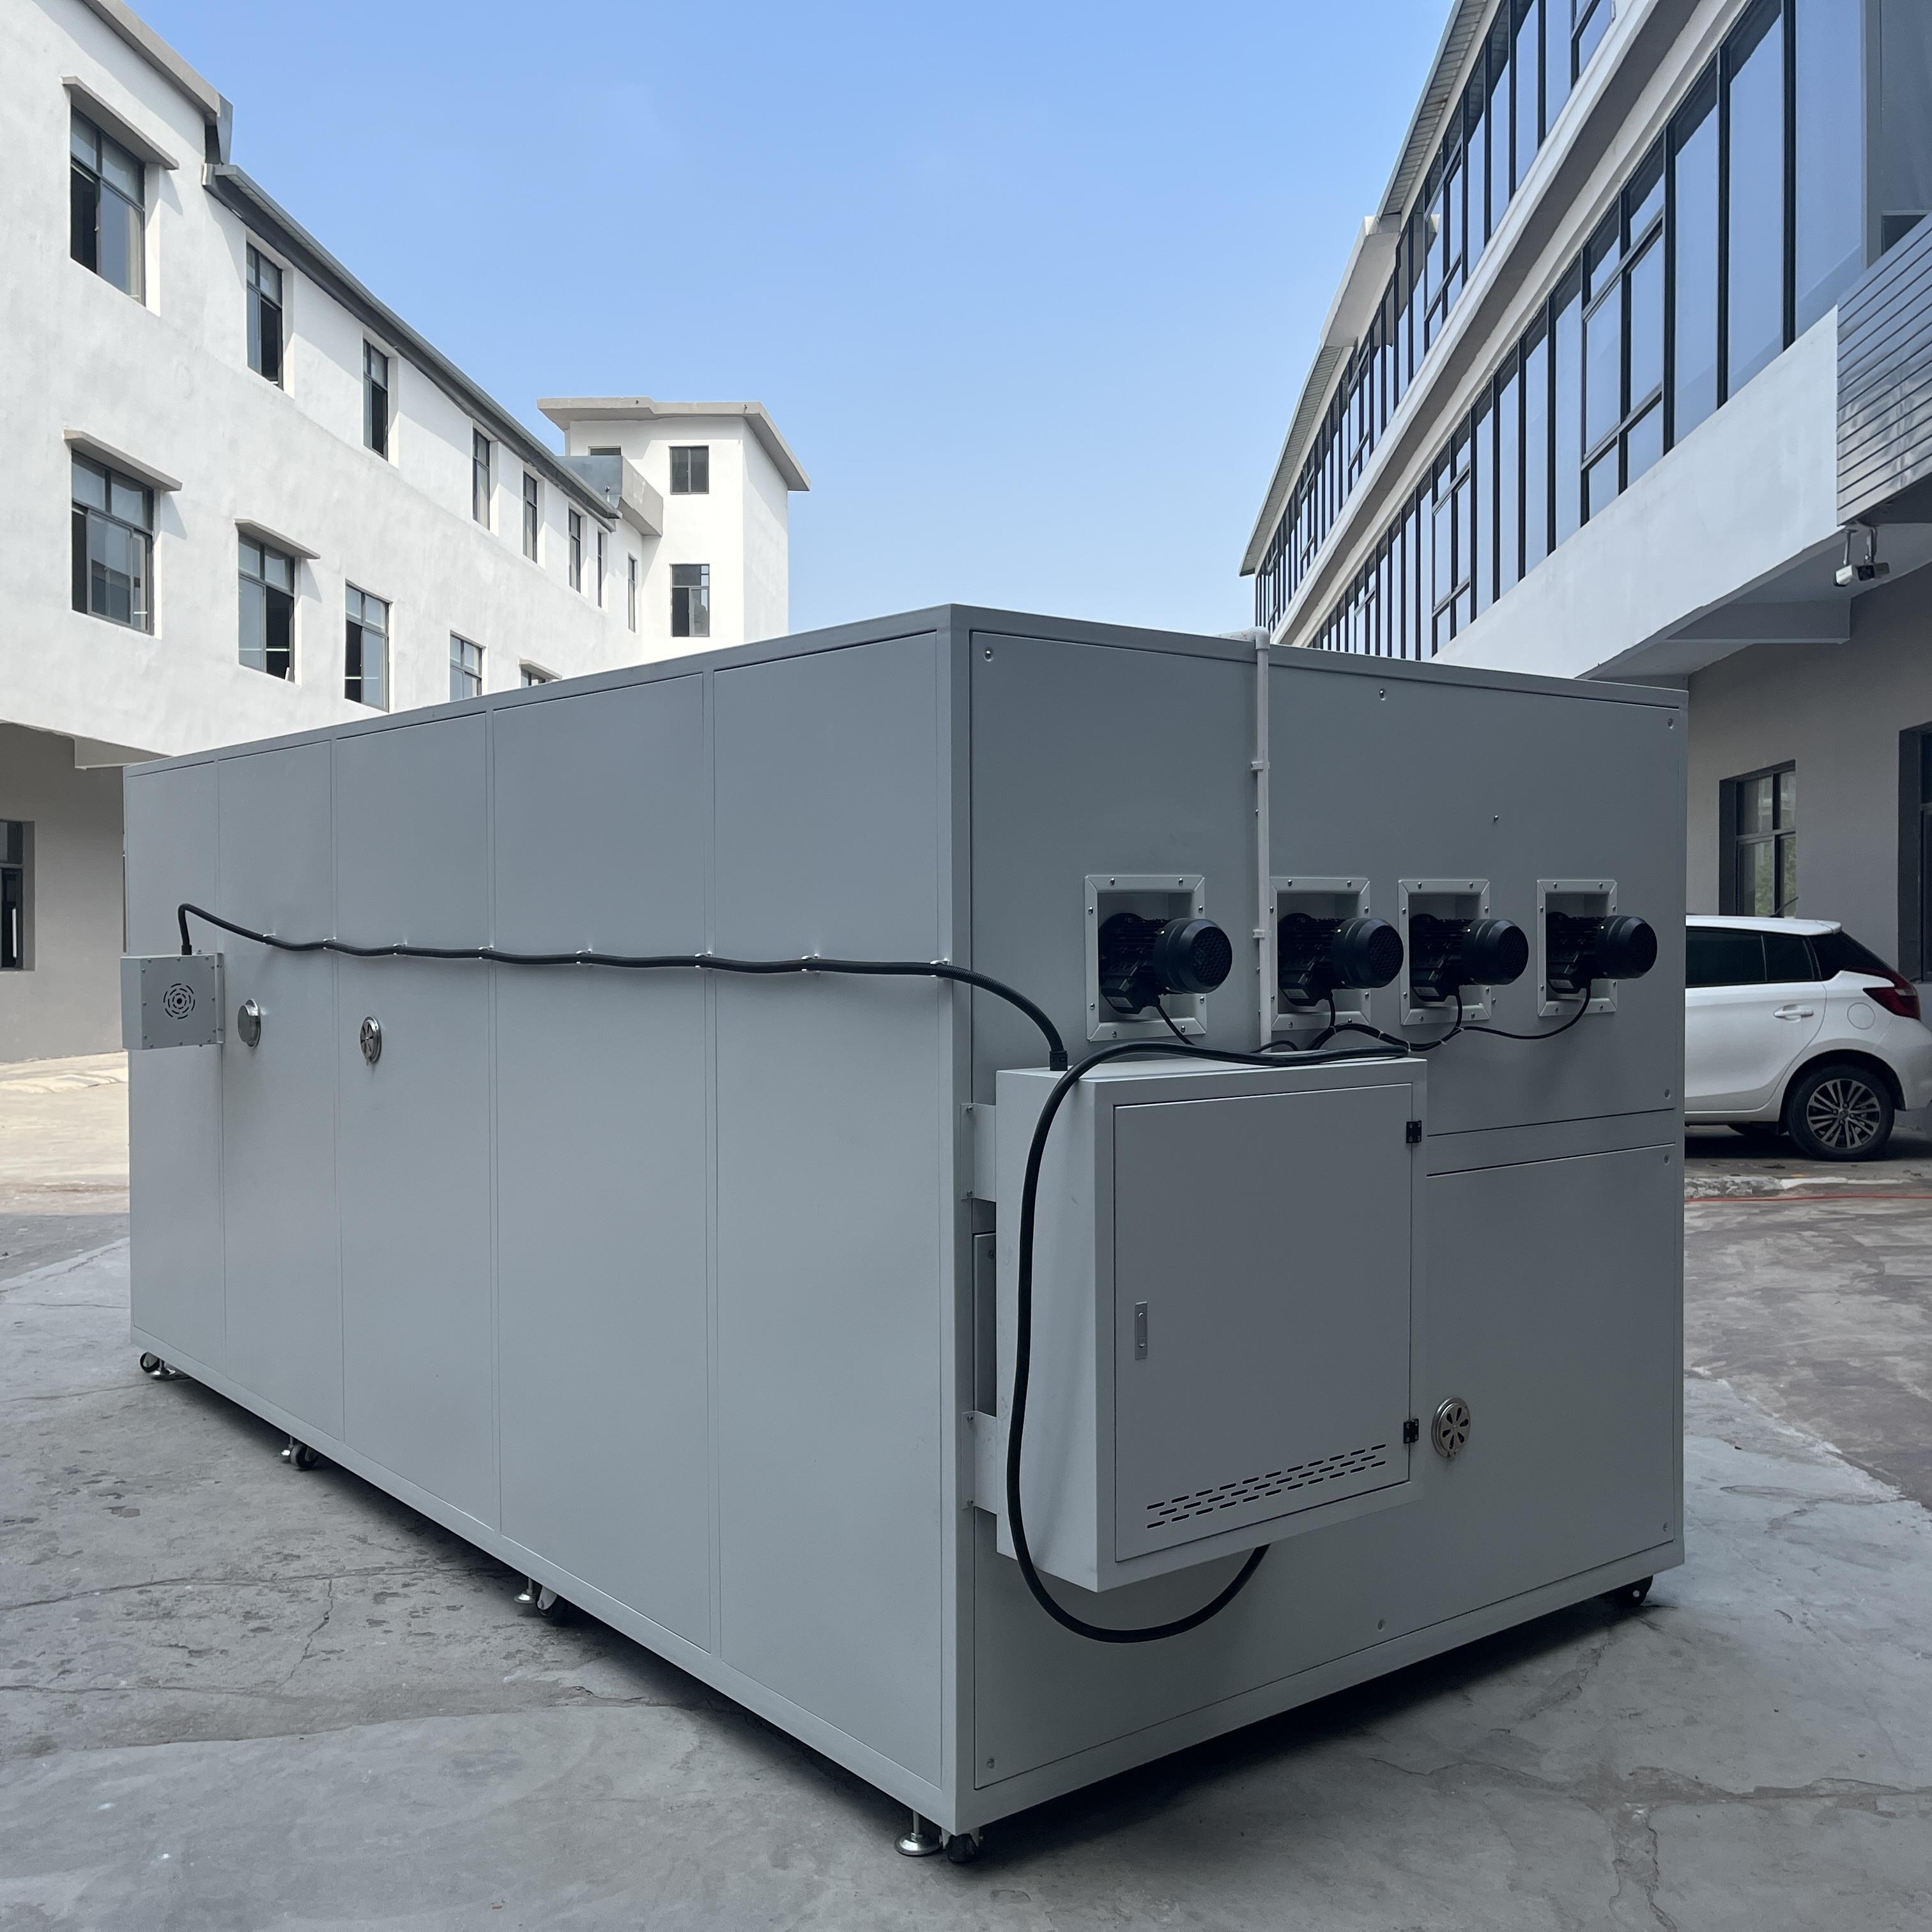 China Manufacturer Big Walk In High Temperature Industrial Microwave Drying Oven Supplier Price For Labarator